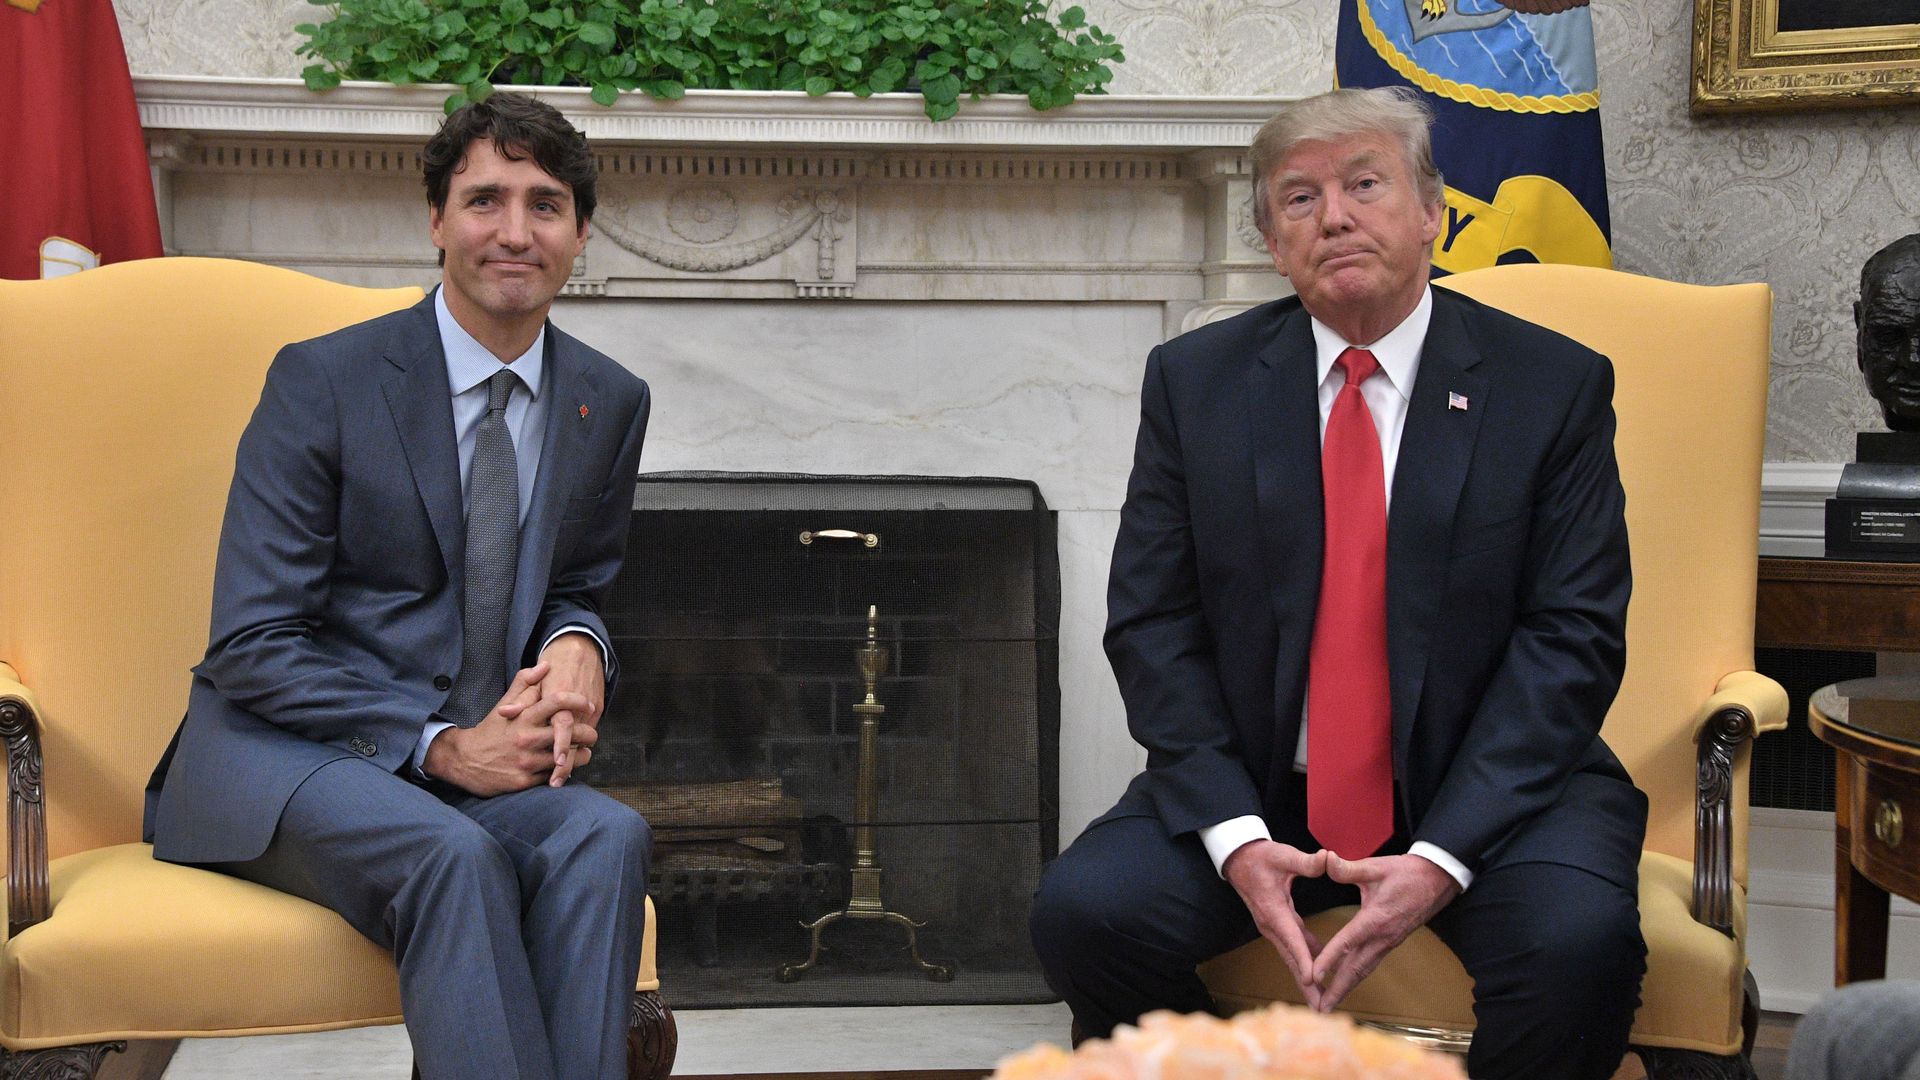 President Trump and Canadian Prime Minister Justin Trudeau. Photo: Jim Watson/AFP/Getty Images